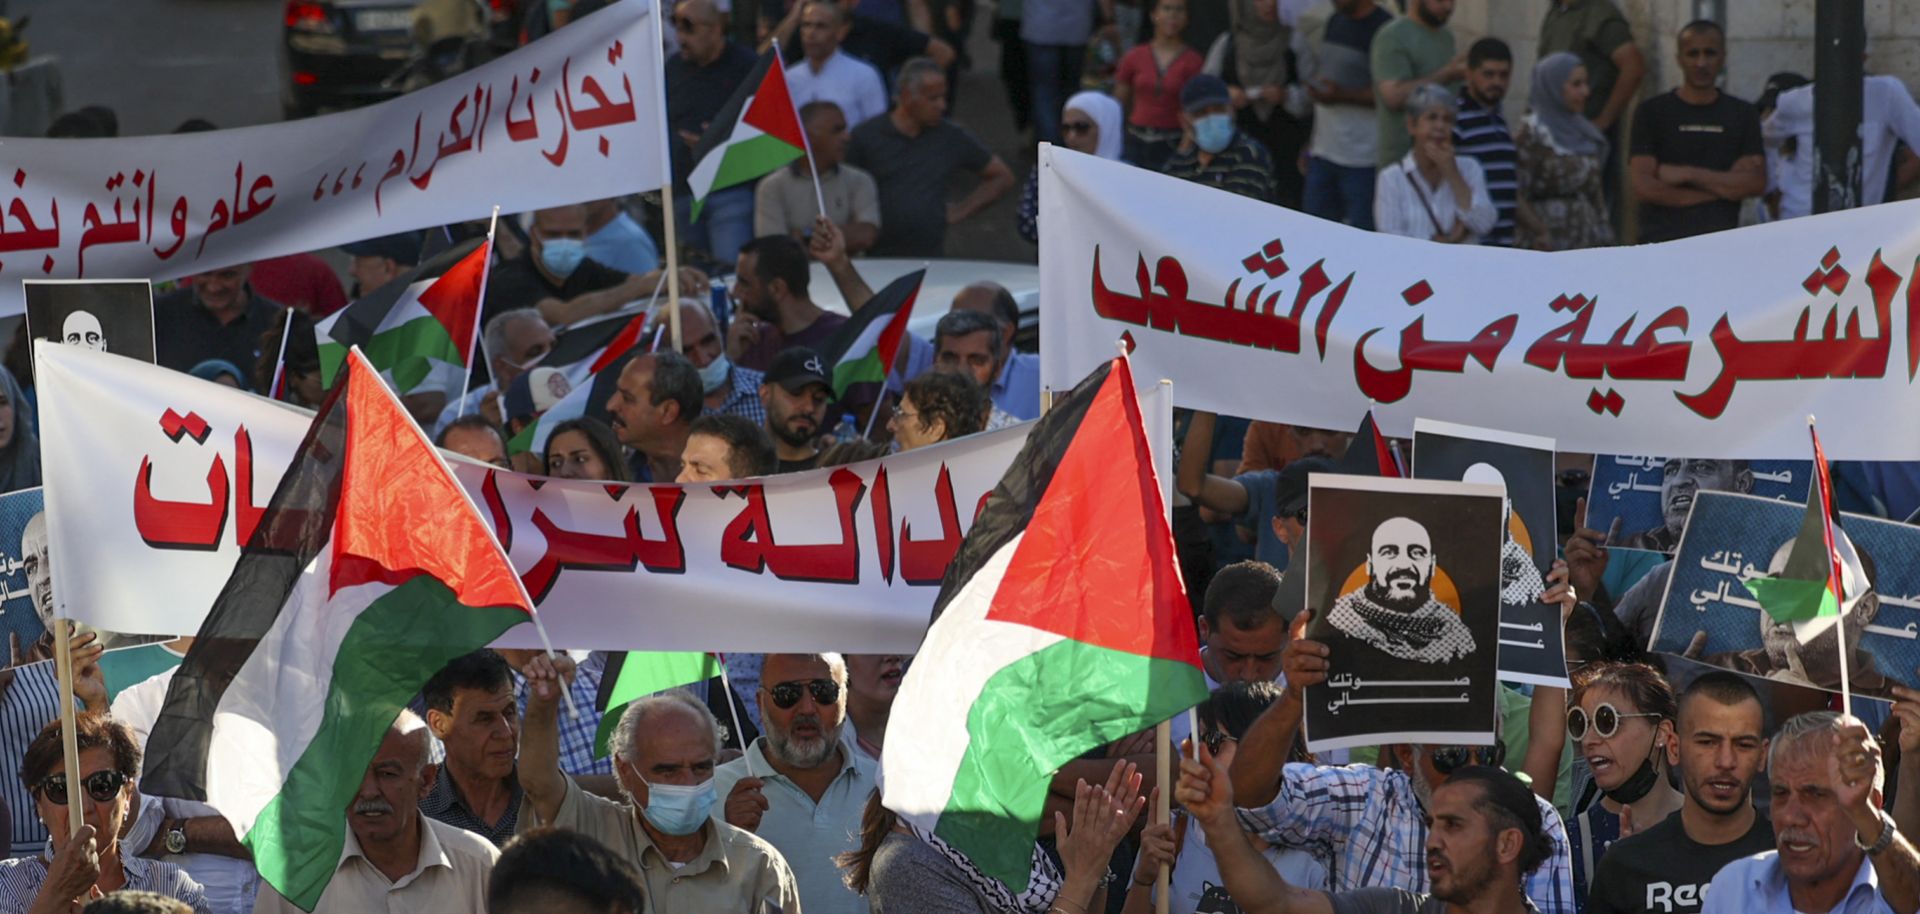 Palestinian protesters rally in Ramallah city on July 17, 2021, denouncing the Palestinian Authority after activist Nizar Banat died while in the custody of its security forces. 